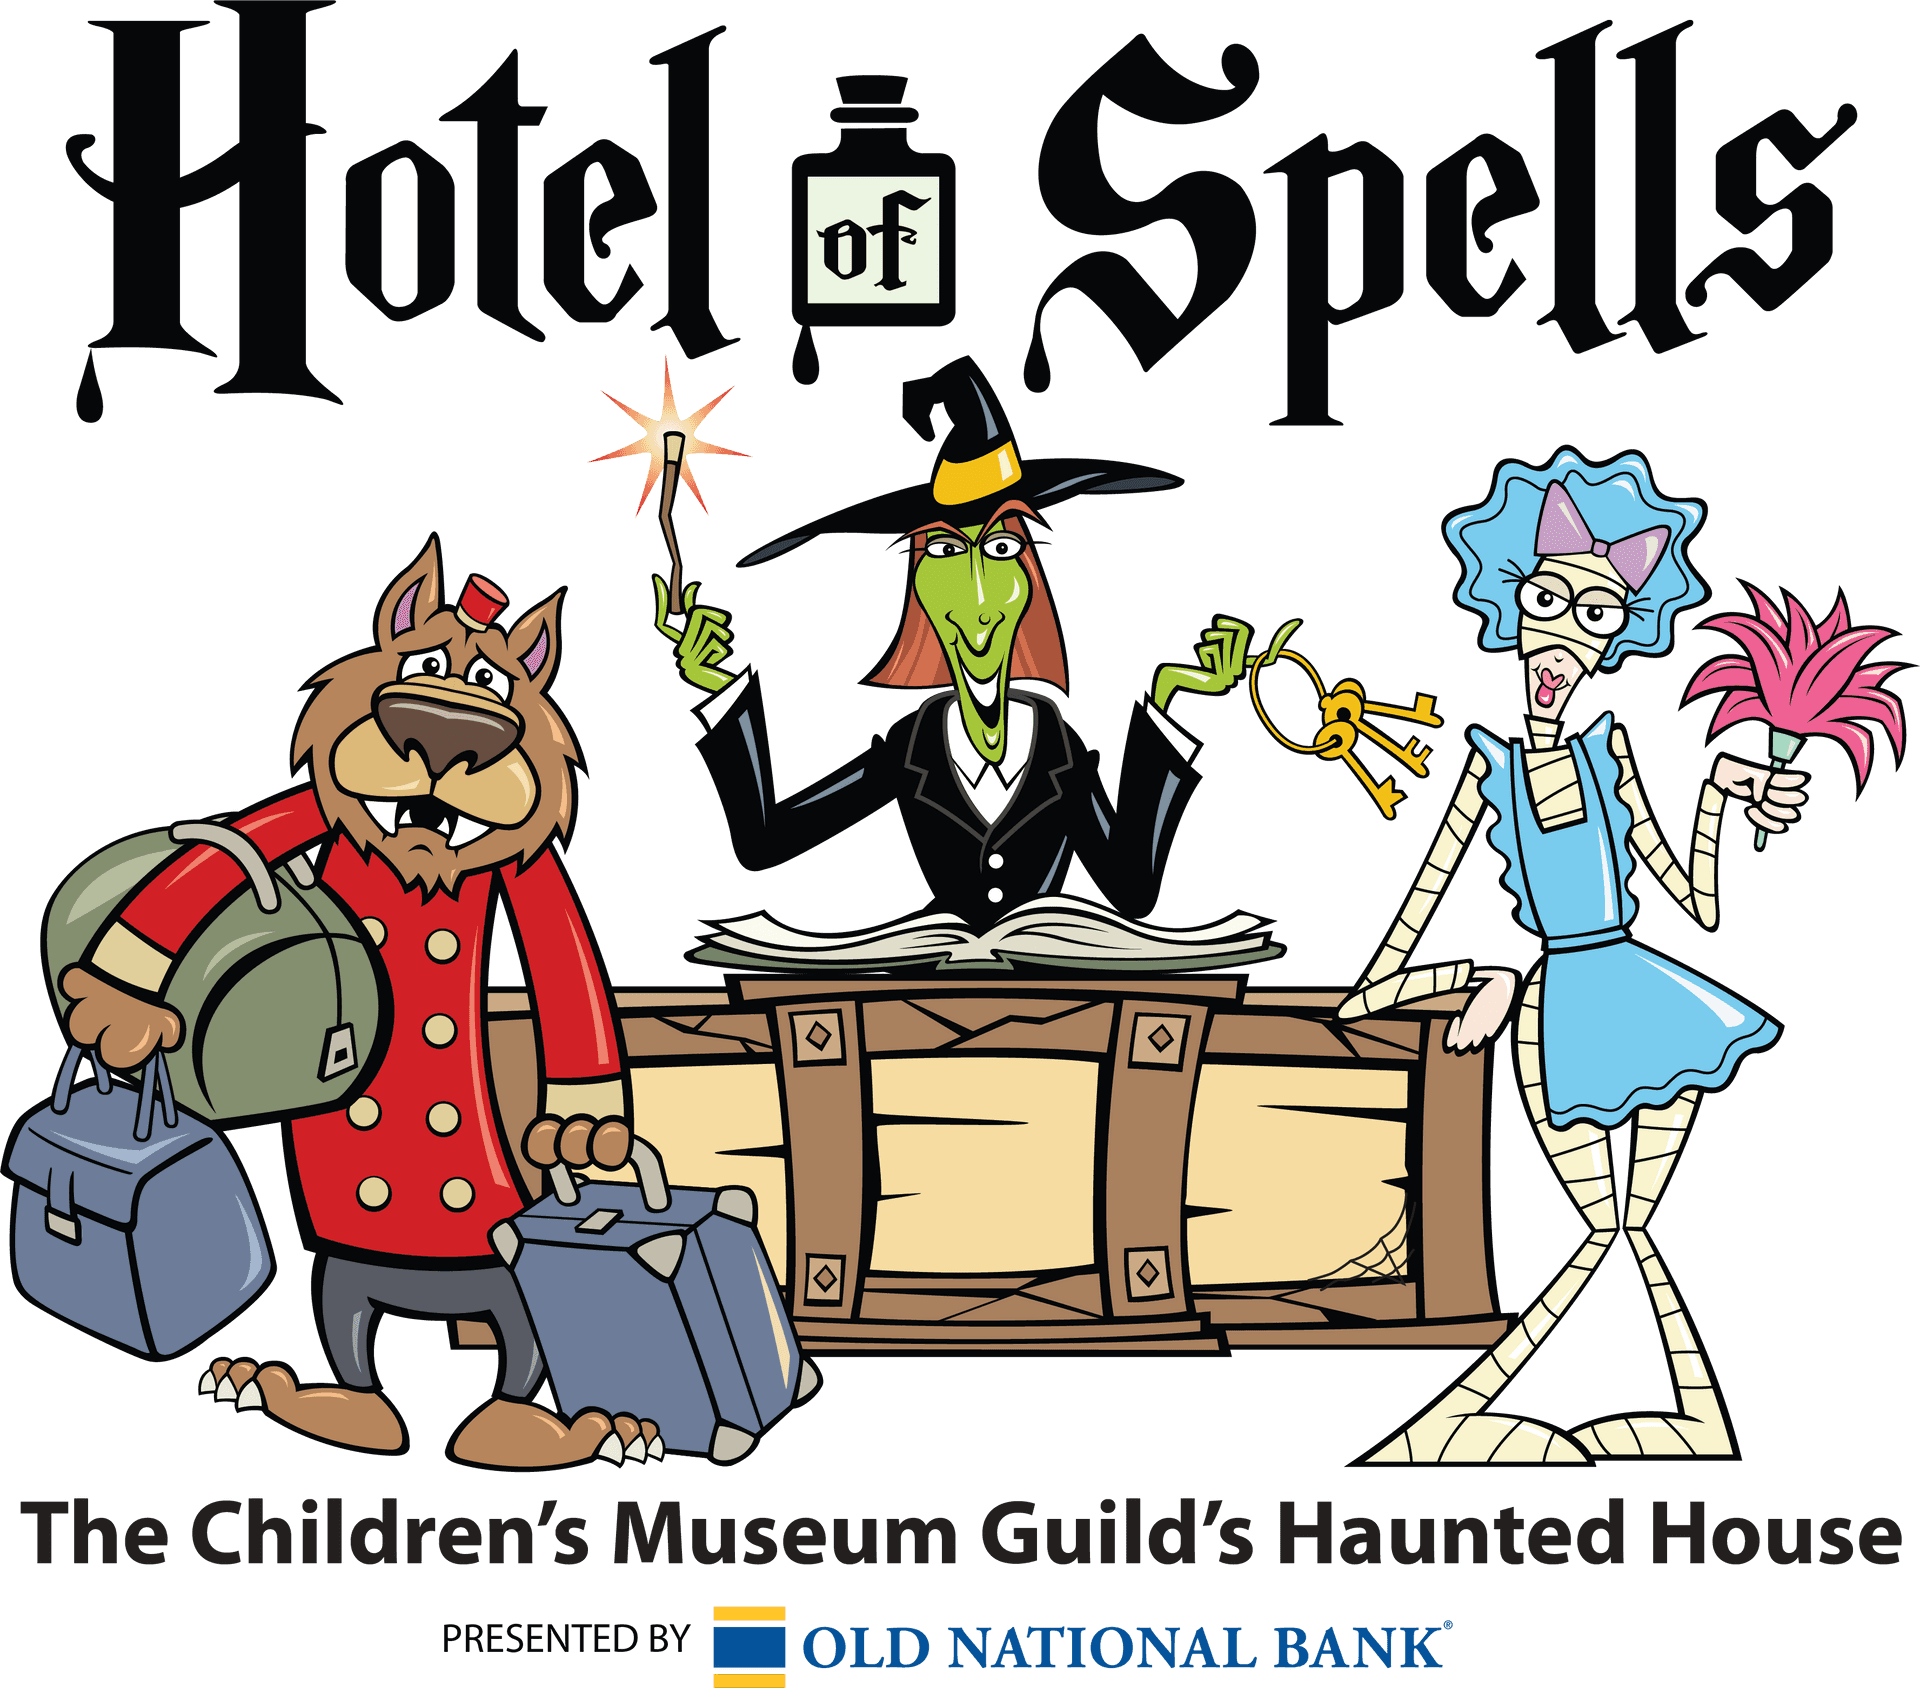 Hotelof Spells Haunted House Promotion PNG